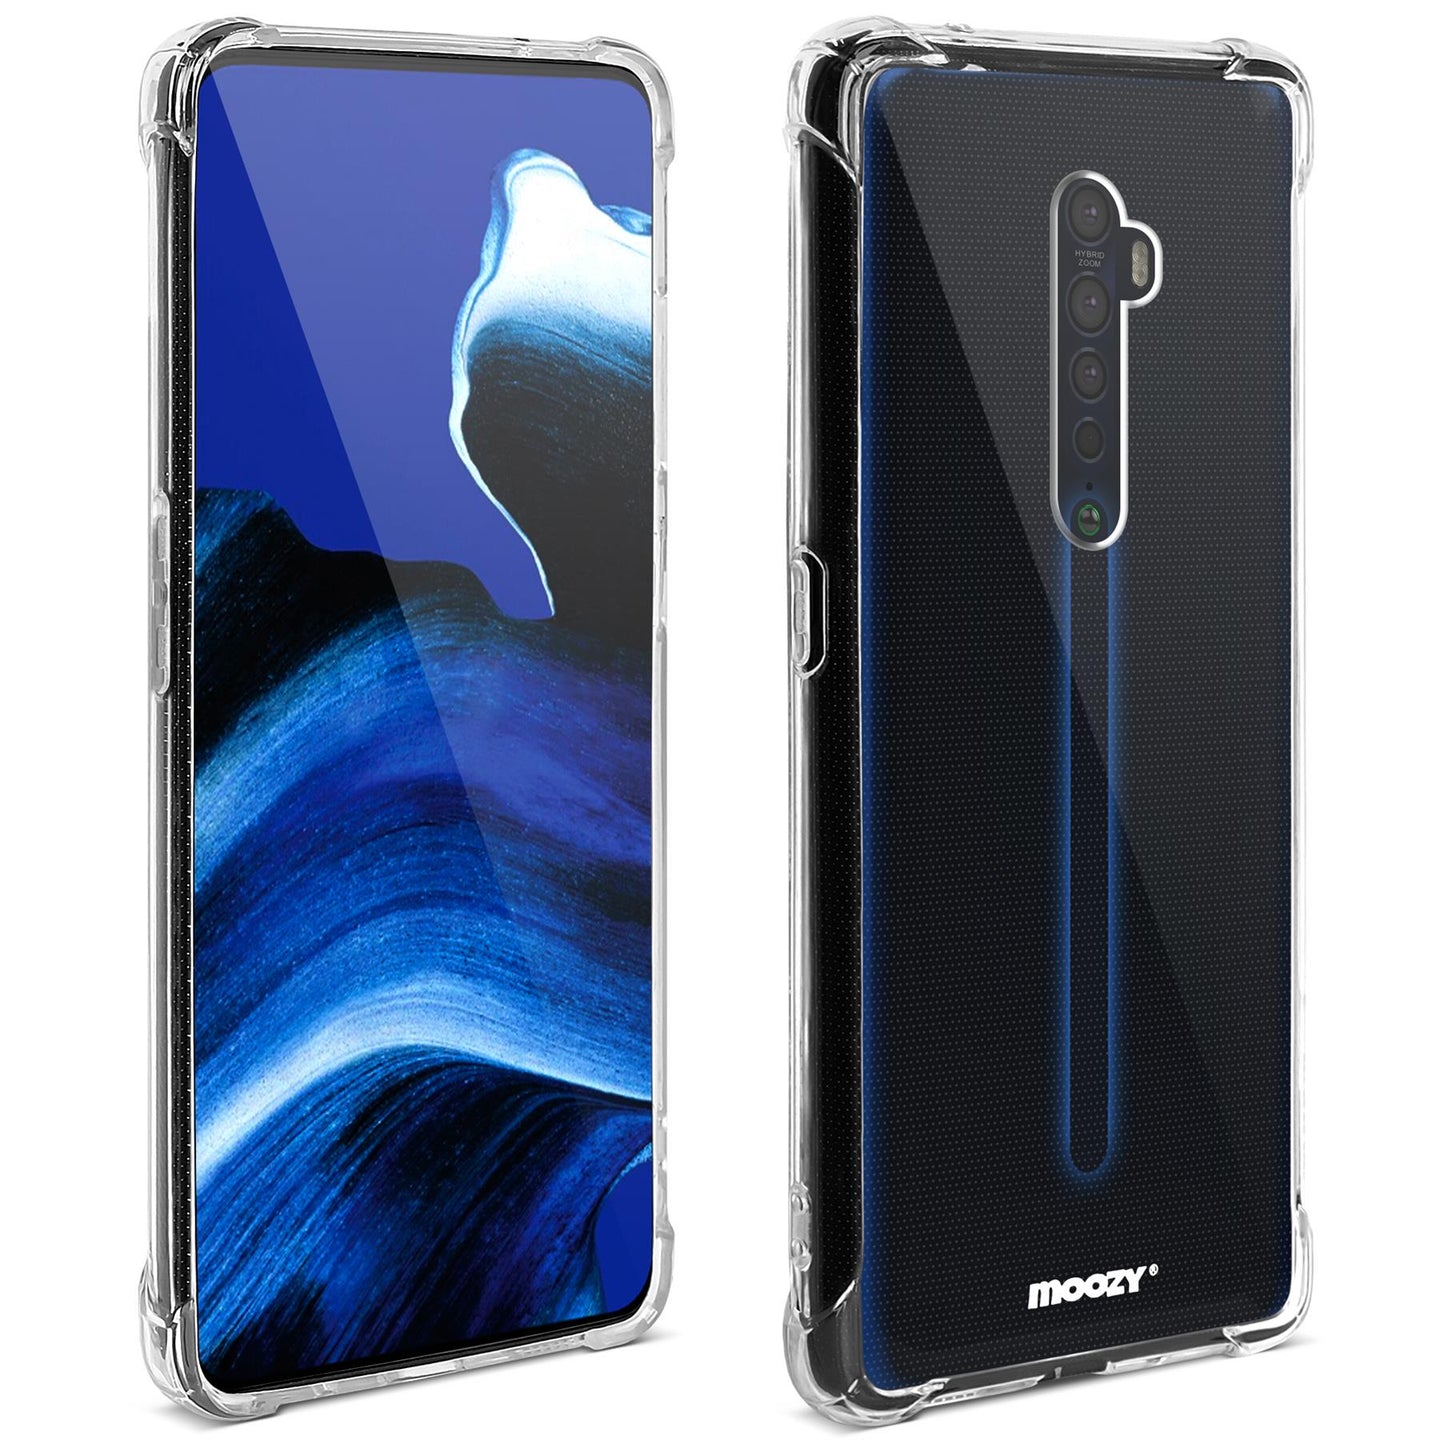 Moozy Shock Proof Silicone Case for Oppo Reno 2 - Transparent Crystal Clear Phone Case Soft TPU Cover